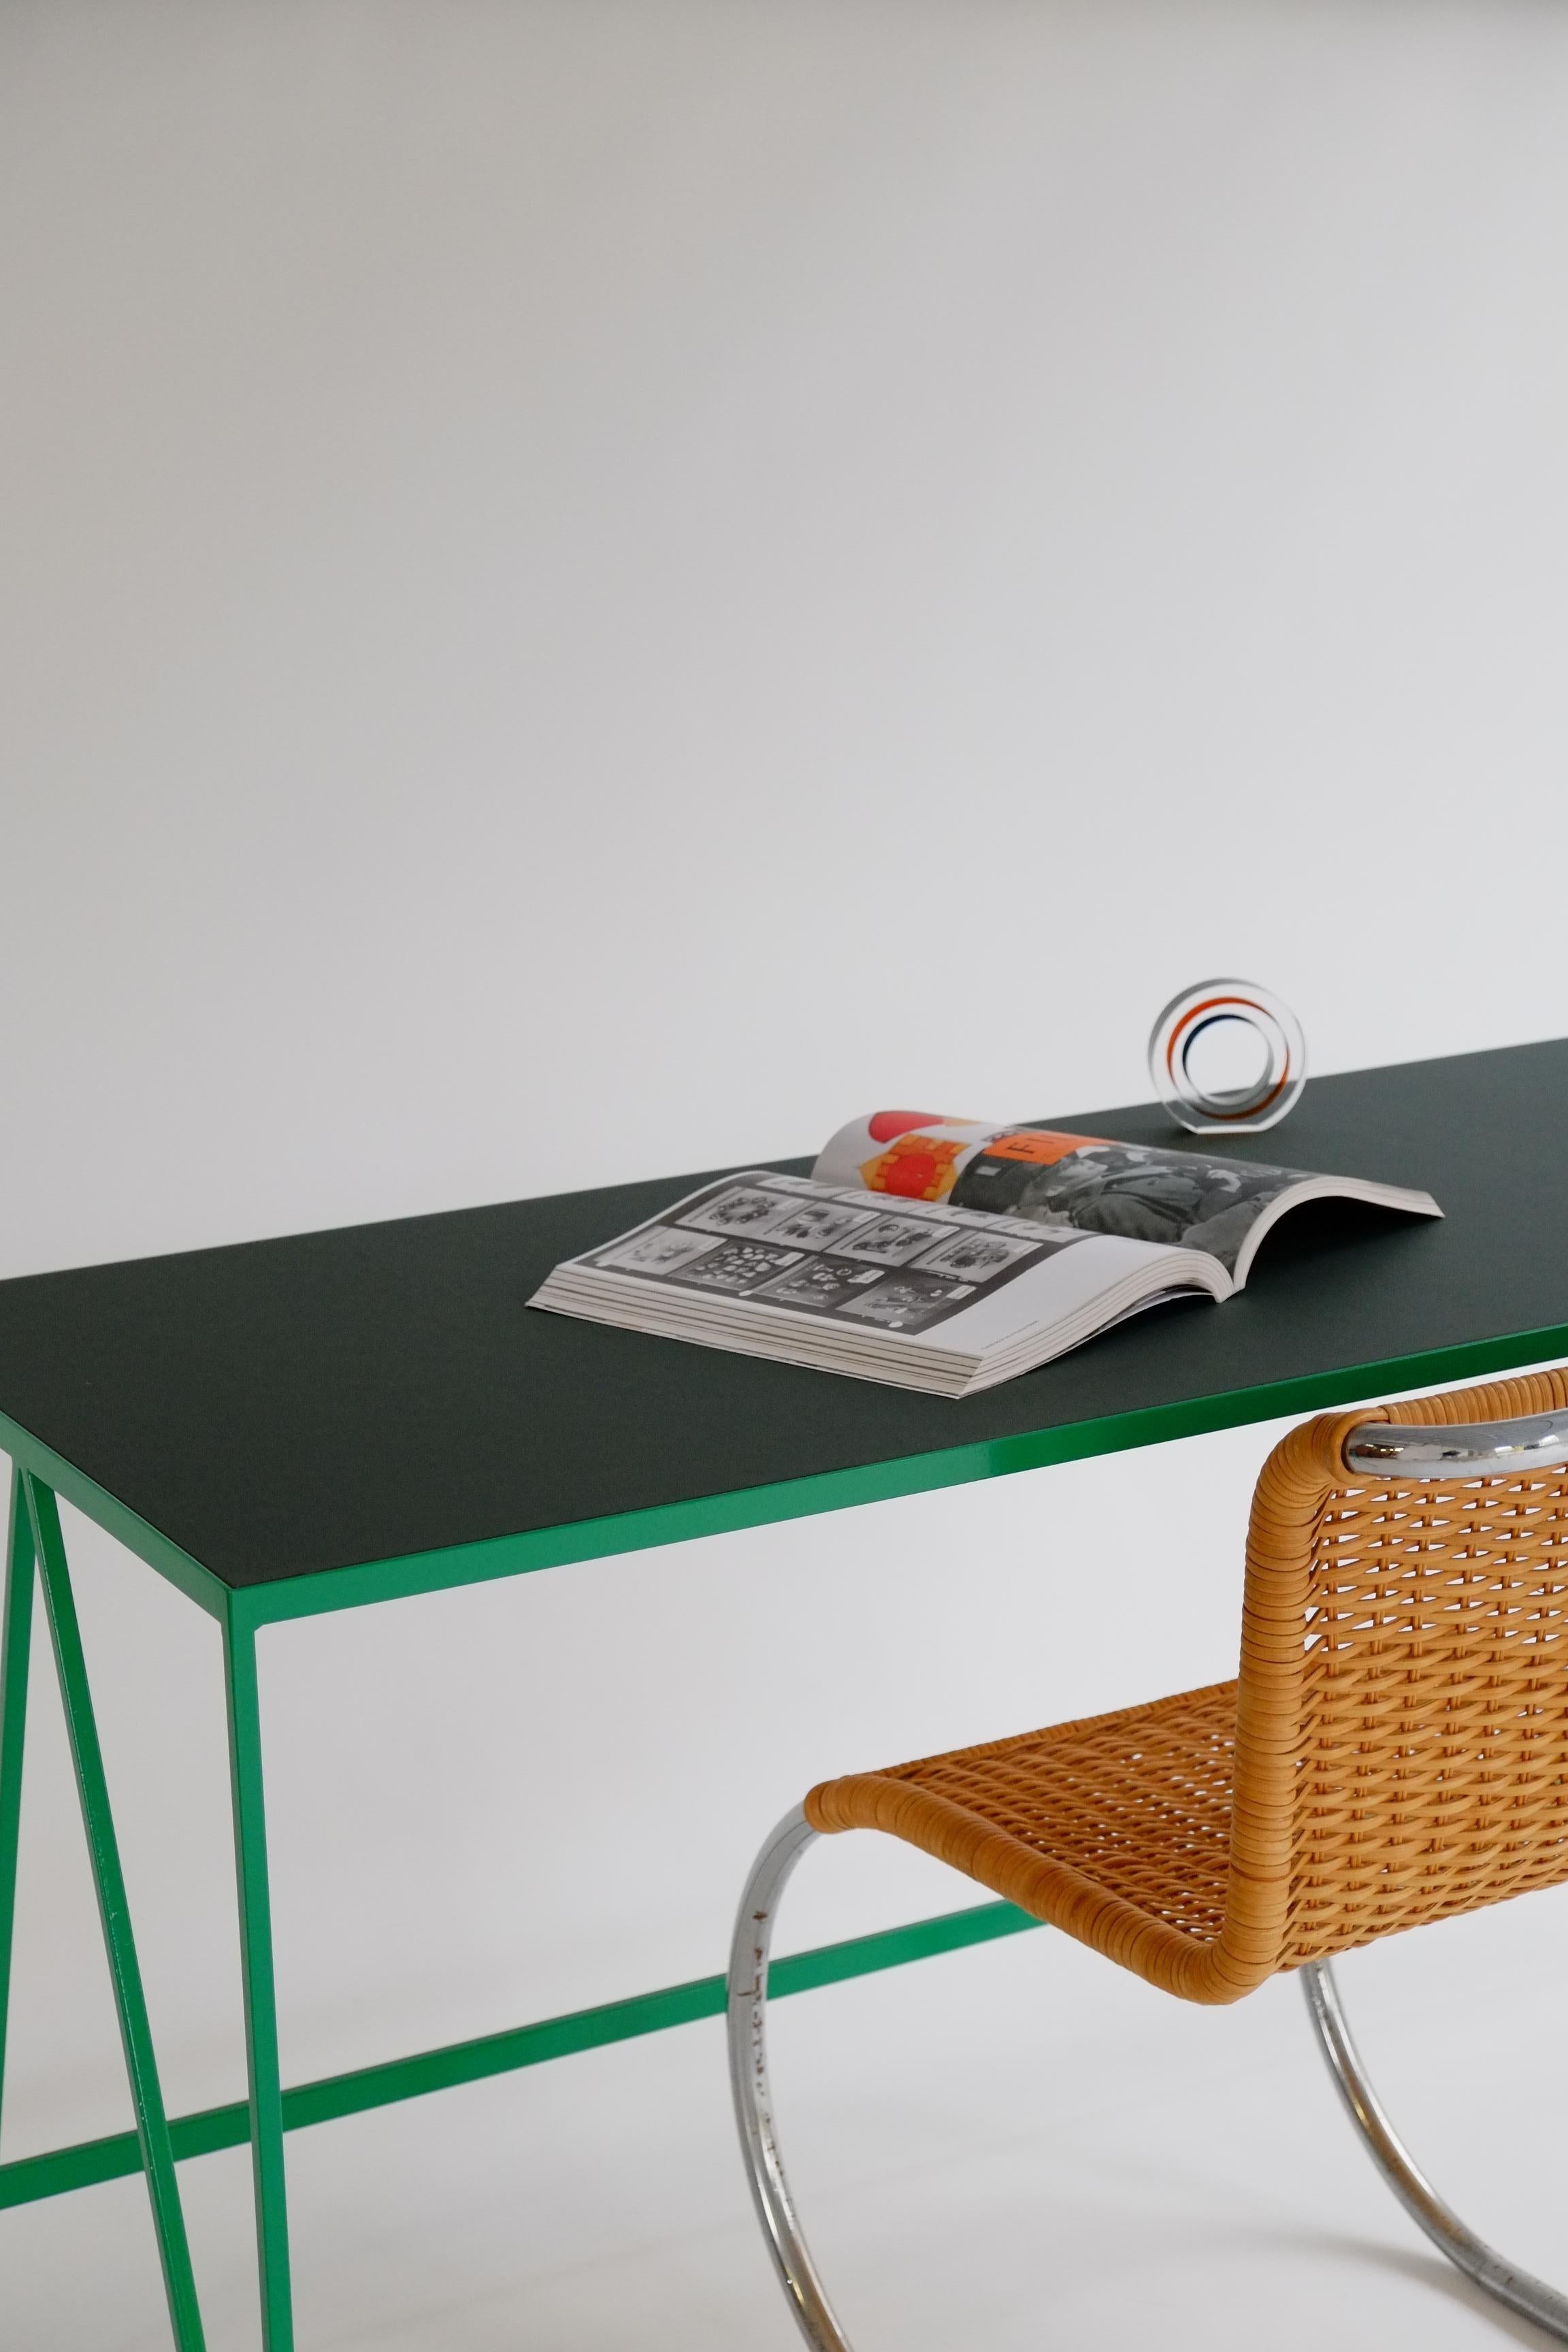 This large Study desk is made with a bright green powder-coated steel frame and a deep green linoleum top made from all-natural ingredients, such as flax, wood flour, and limestone. The furniture linoleum provides a natural satin matt surface with a